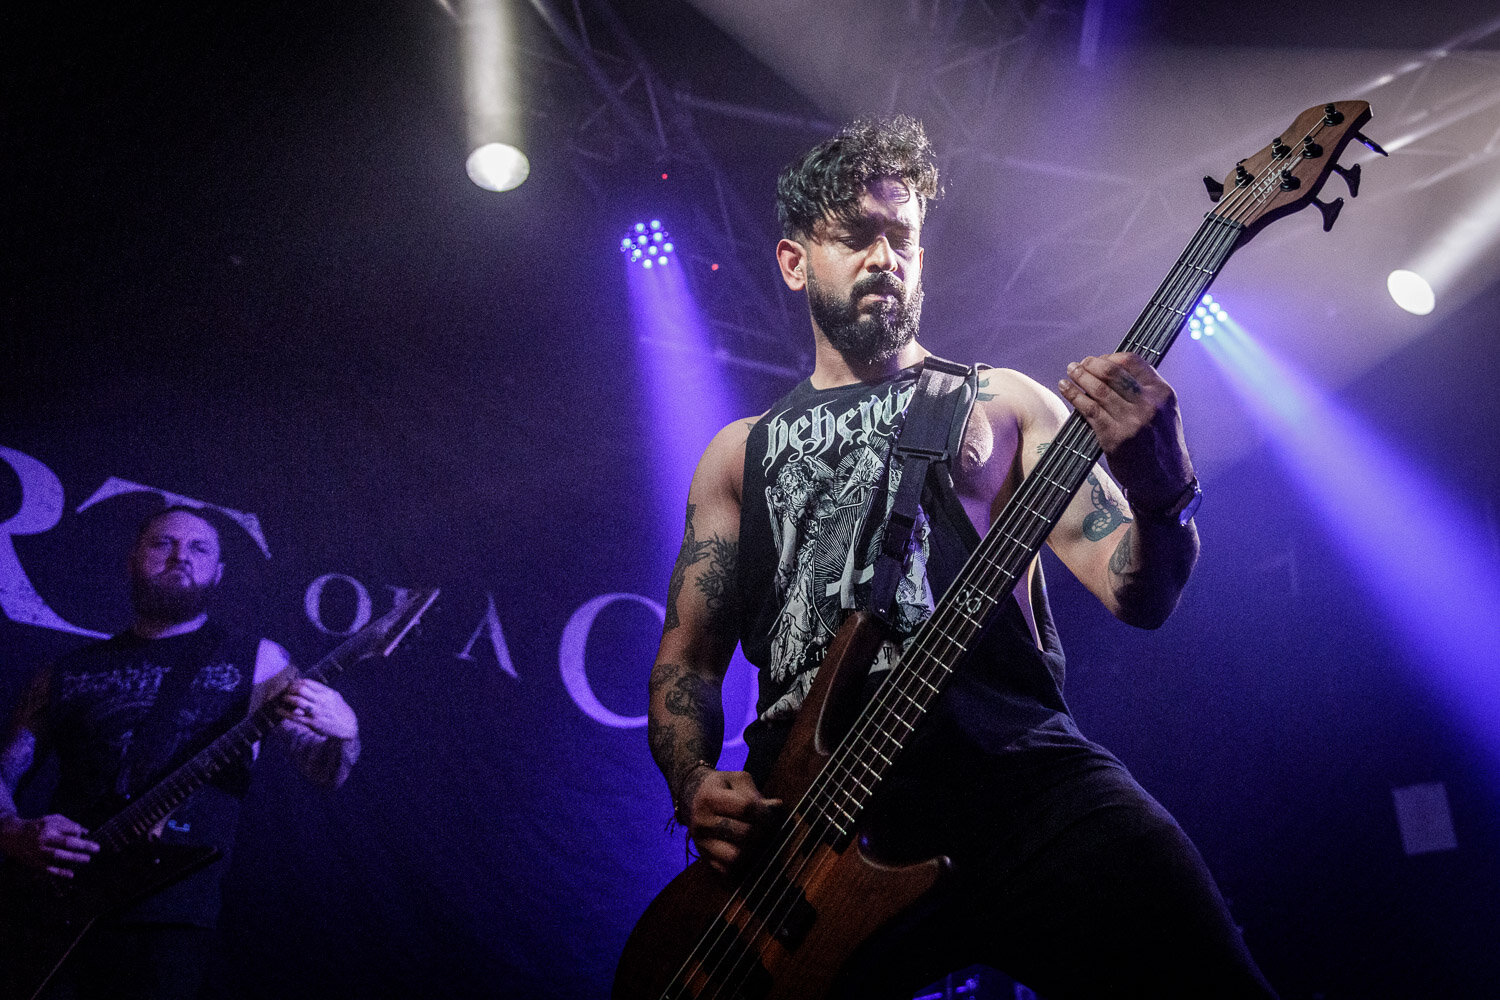 Heart Of A Coward at the Live Rooms in Chester on November 26th 2019 ©Johann Wierzbicki | ROCKFLESH